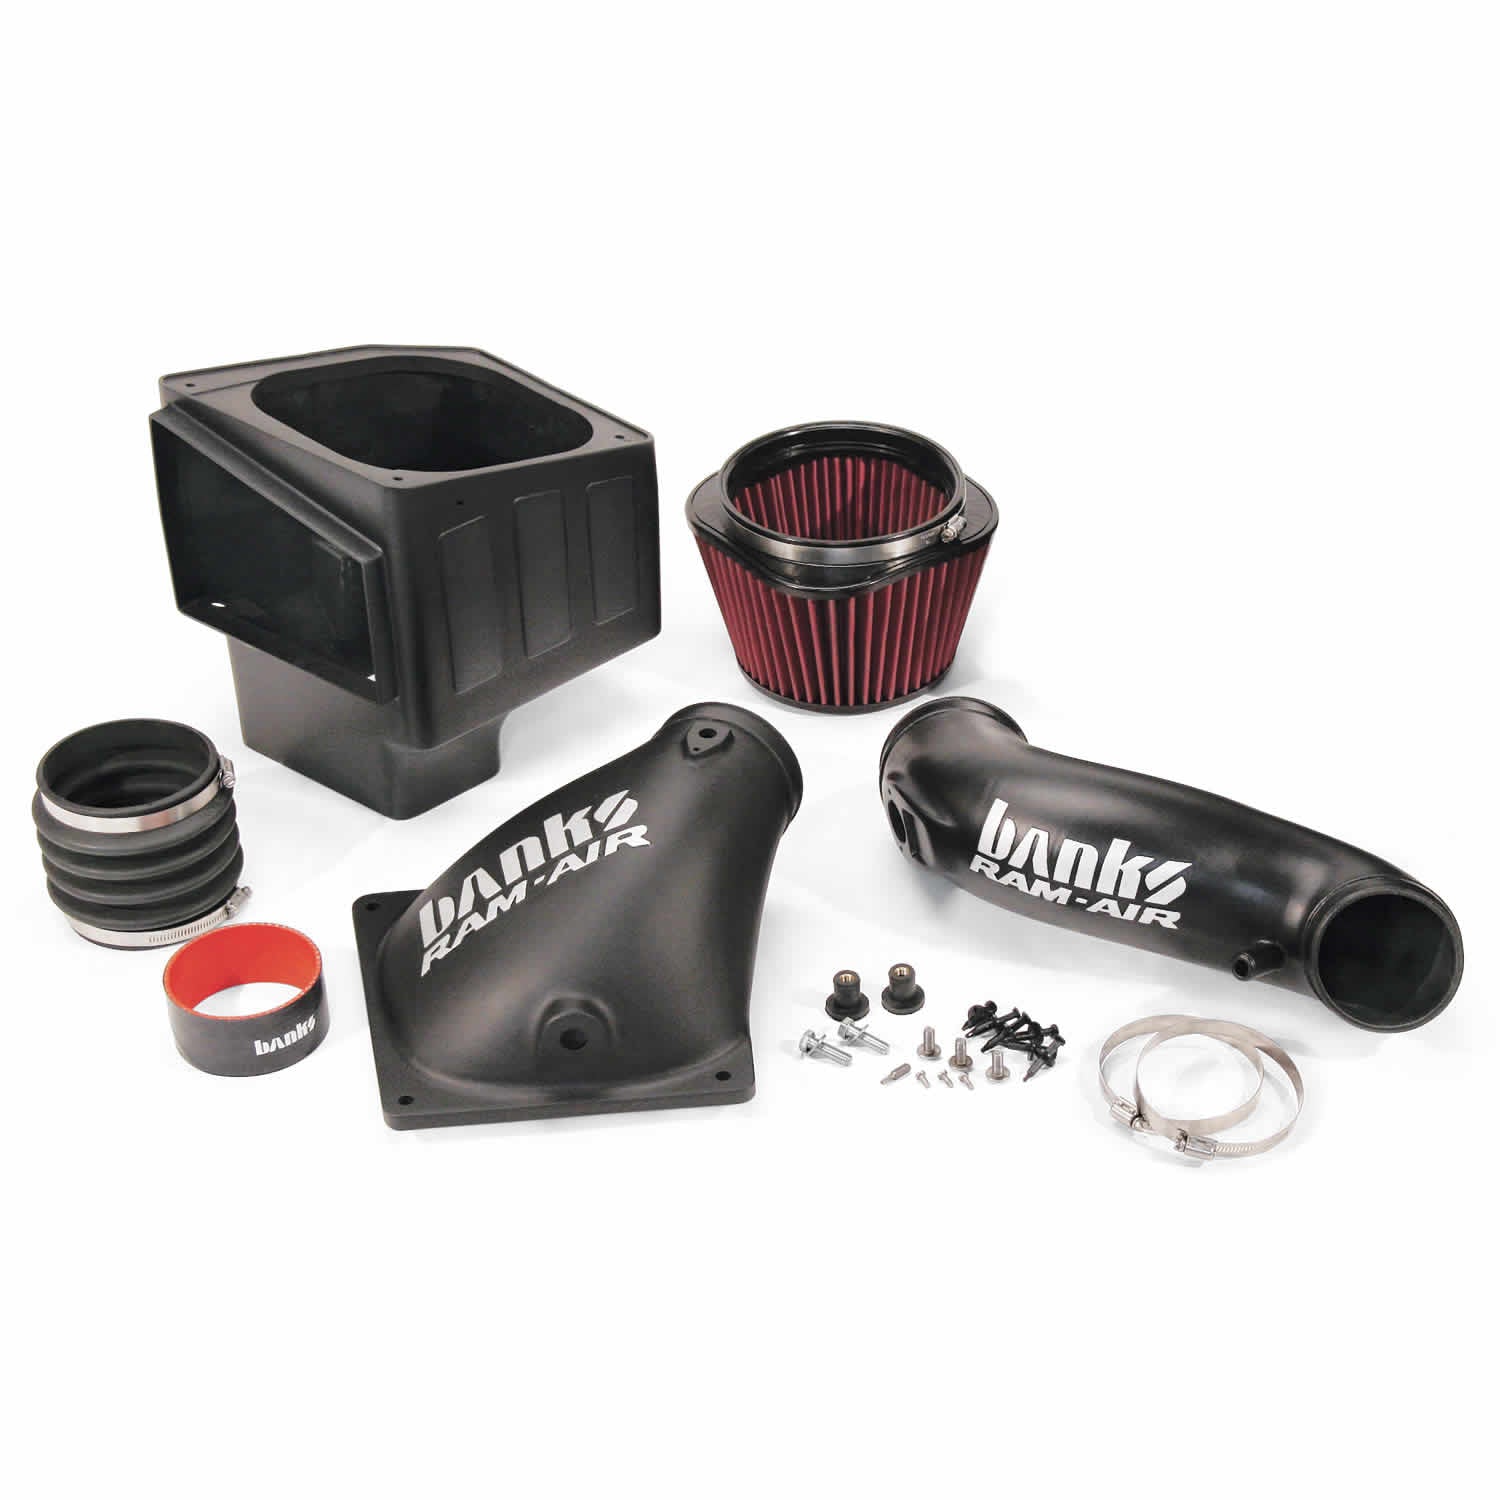 Components of the Banks Ram-Air intake for 6.7L Cummins